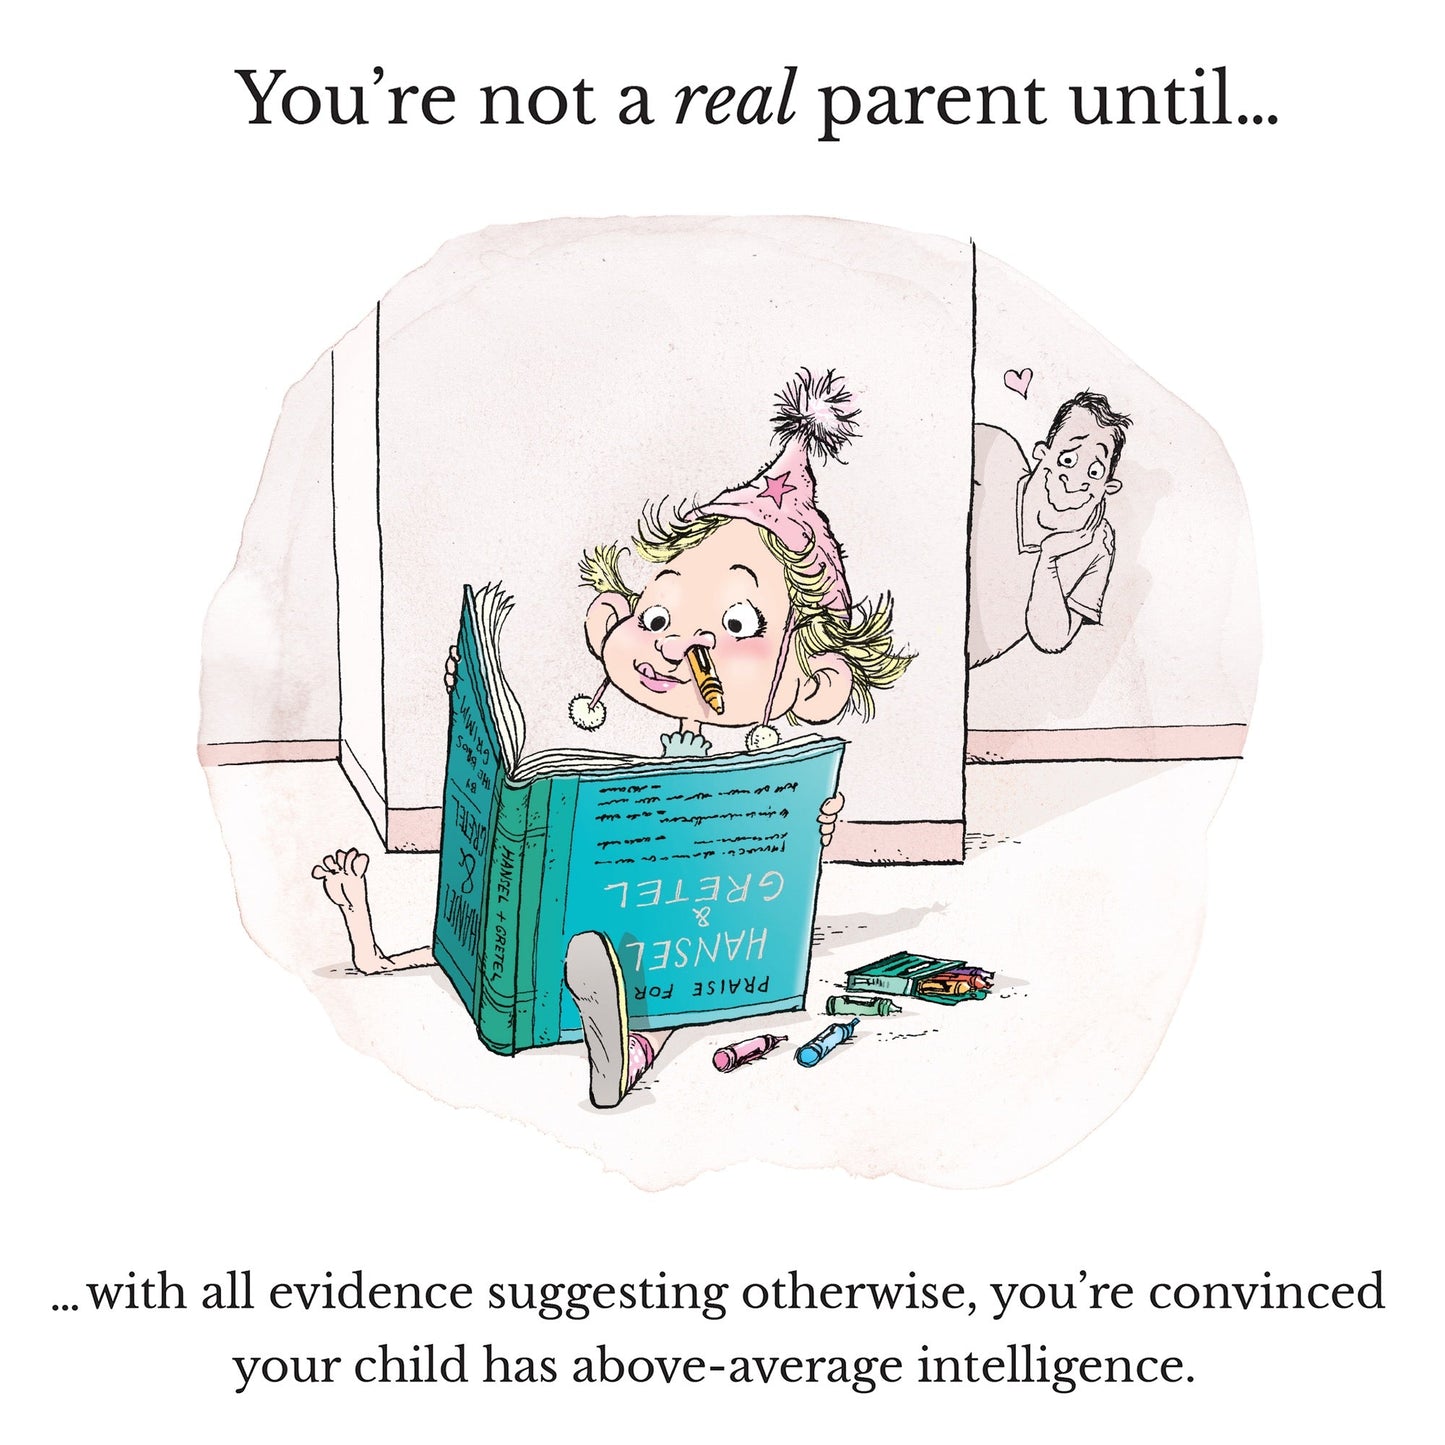 (Perth) Hardcover Book: You're Not A Real Parent Until...